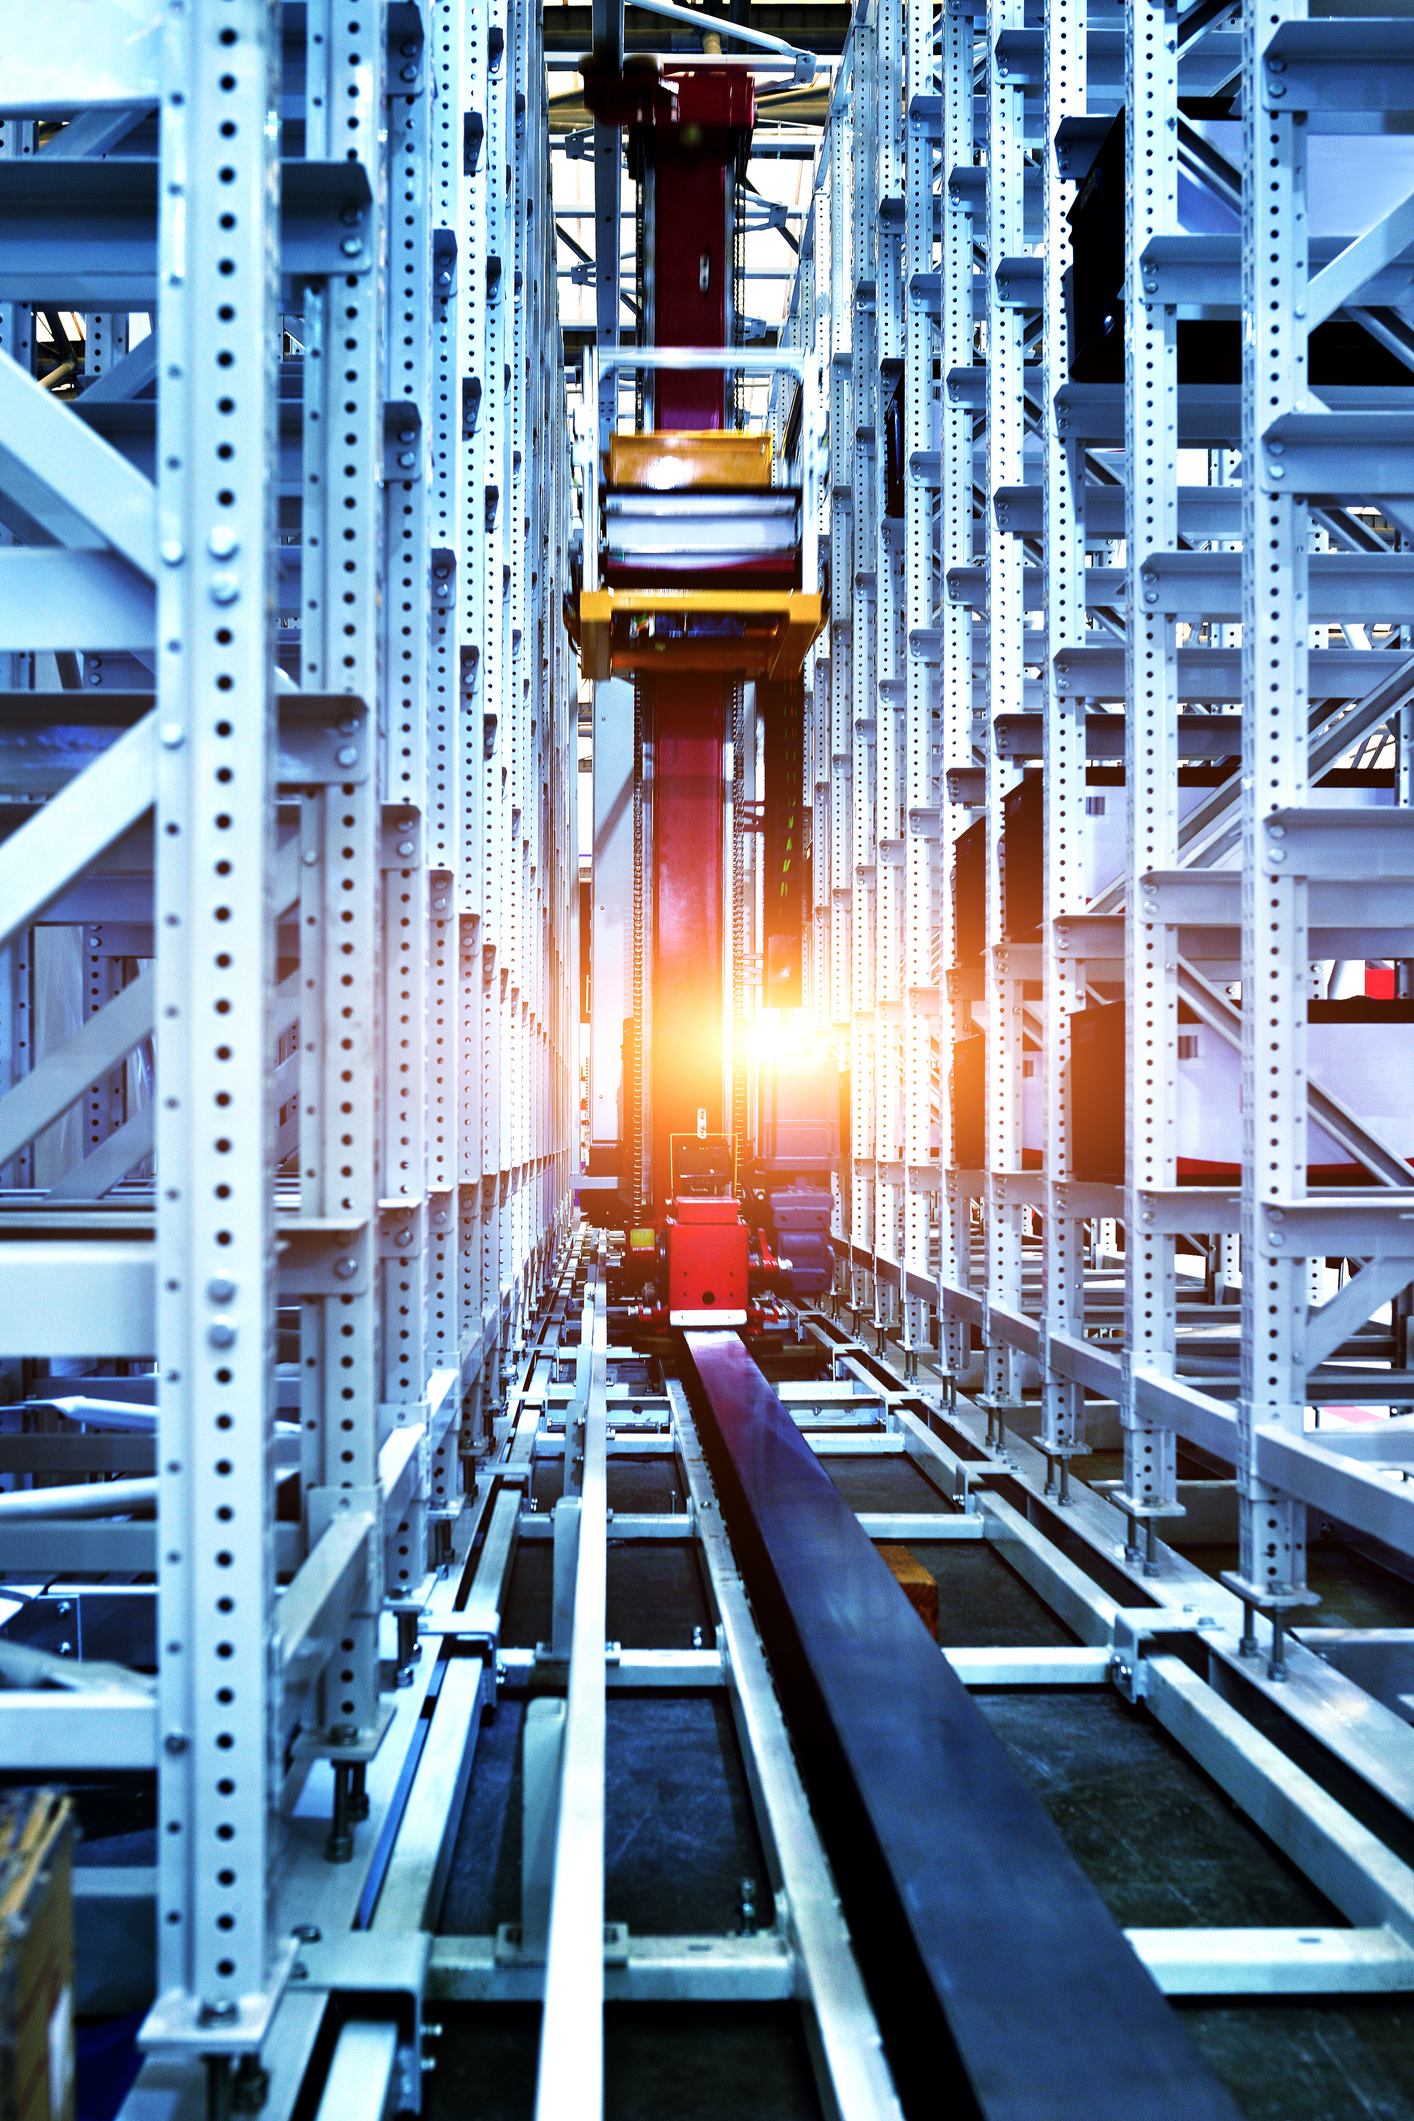 Variable speed drives (VSDs) play an integral role in warehouse stacker crane systems. By improving the efficiency and accuracy of warehouse processes, VSDs can significantly increase a business’s competitiveness overall.